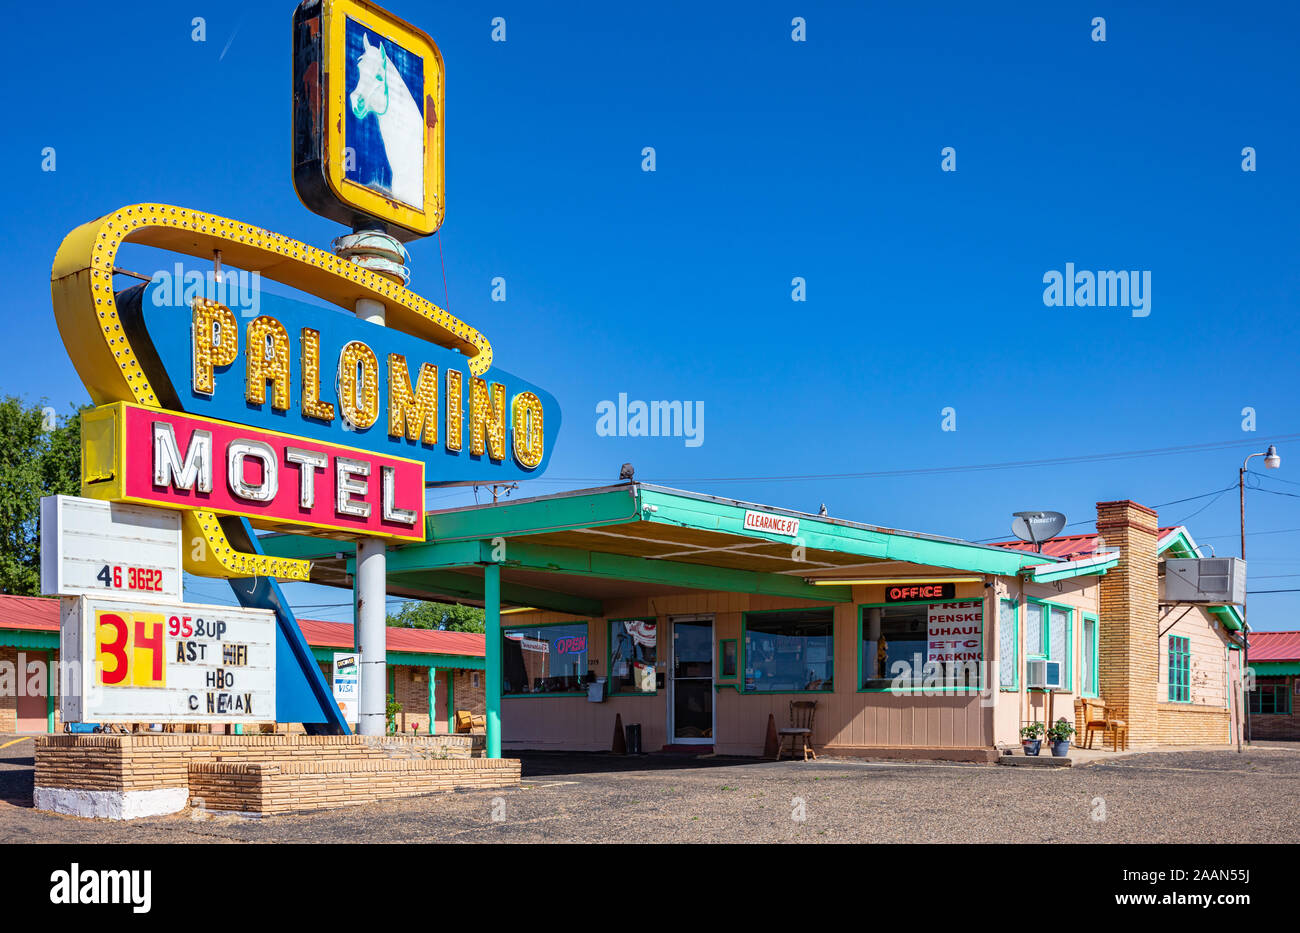 Tucumcari, New Mexico, USA. May 14, 2019. The Palomino Motel is a historic building on route 66 that invites travelers to get rest into a traditional Stock Photo